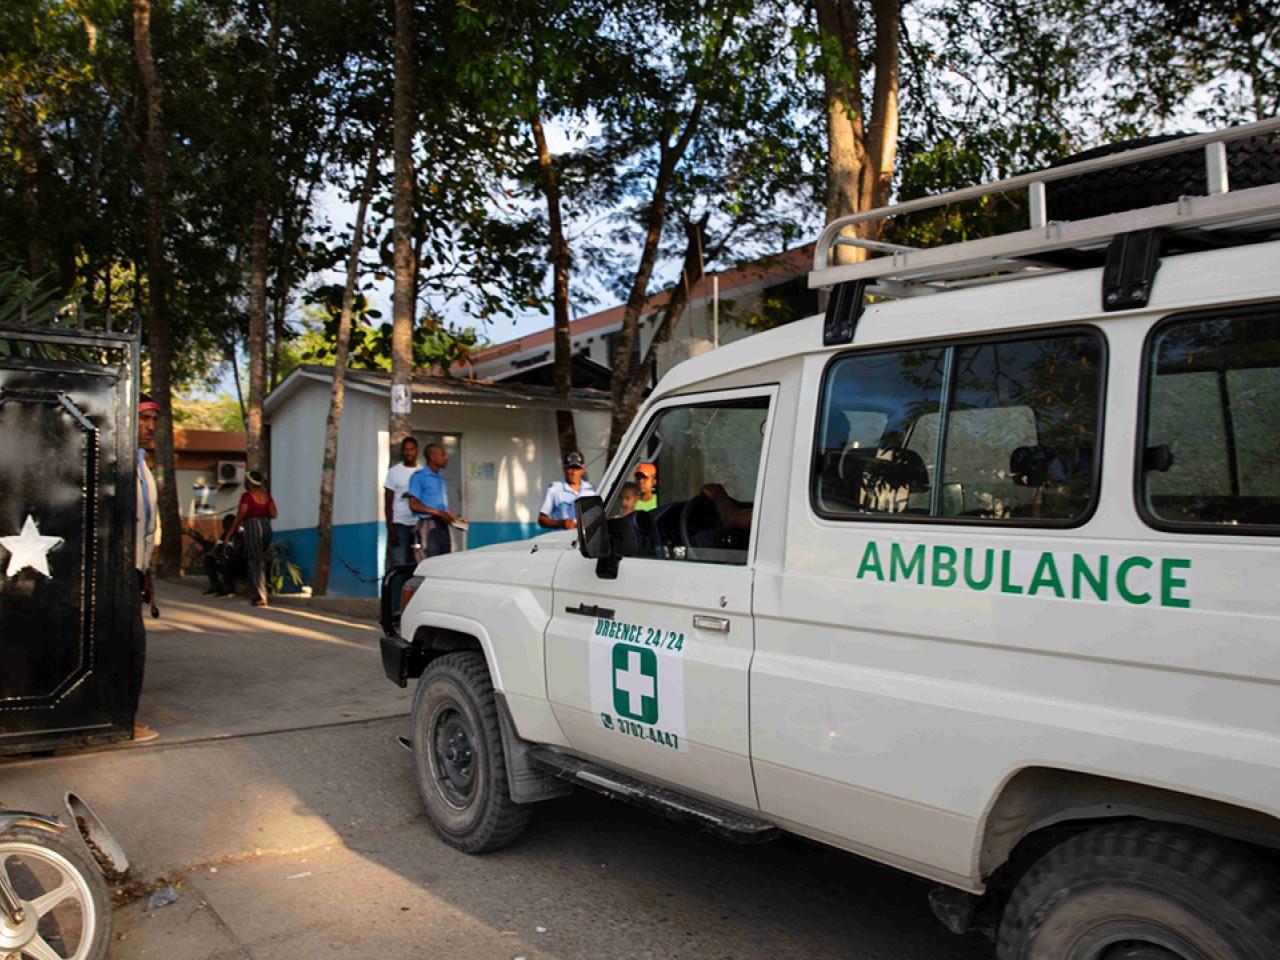 An ambulance enters a health facility in Haiti. The country is experiencing ongoing civil unrest, which complicates health delivery for patients. Direct Relief is supporting nine health facilities with cash support of $1 million total so they can maintain operations. (Courtesy photo)